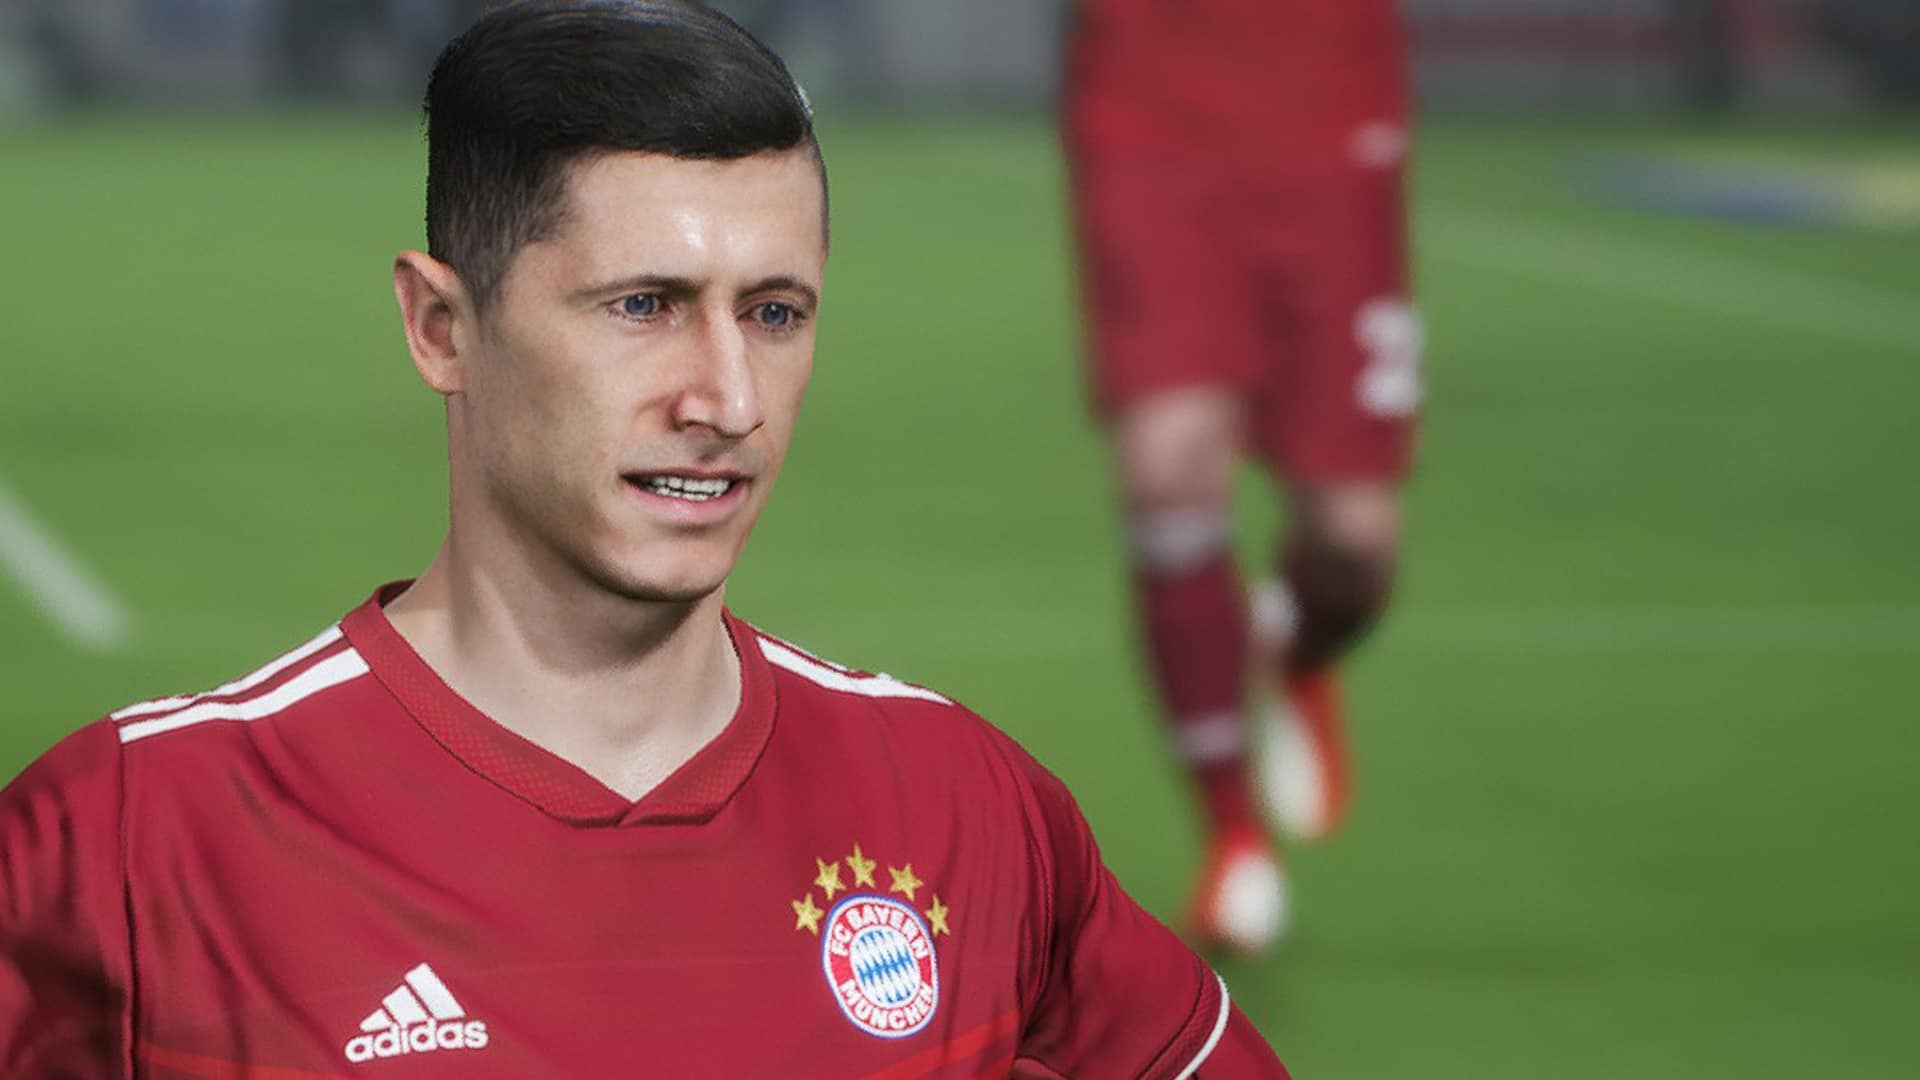 PES is now called eFootball, is Free2Play, a technical disaster and one of the worst rated games on Steam.